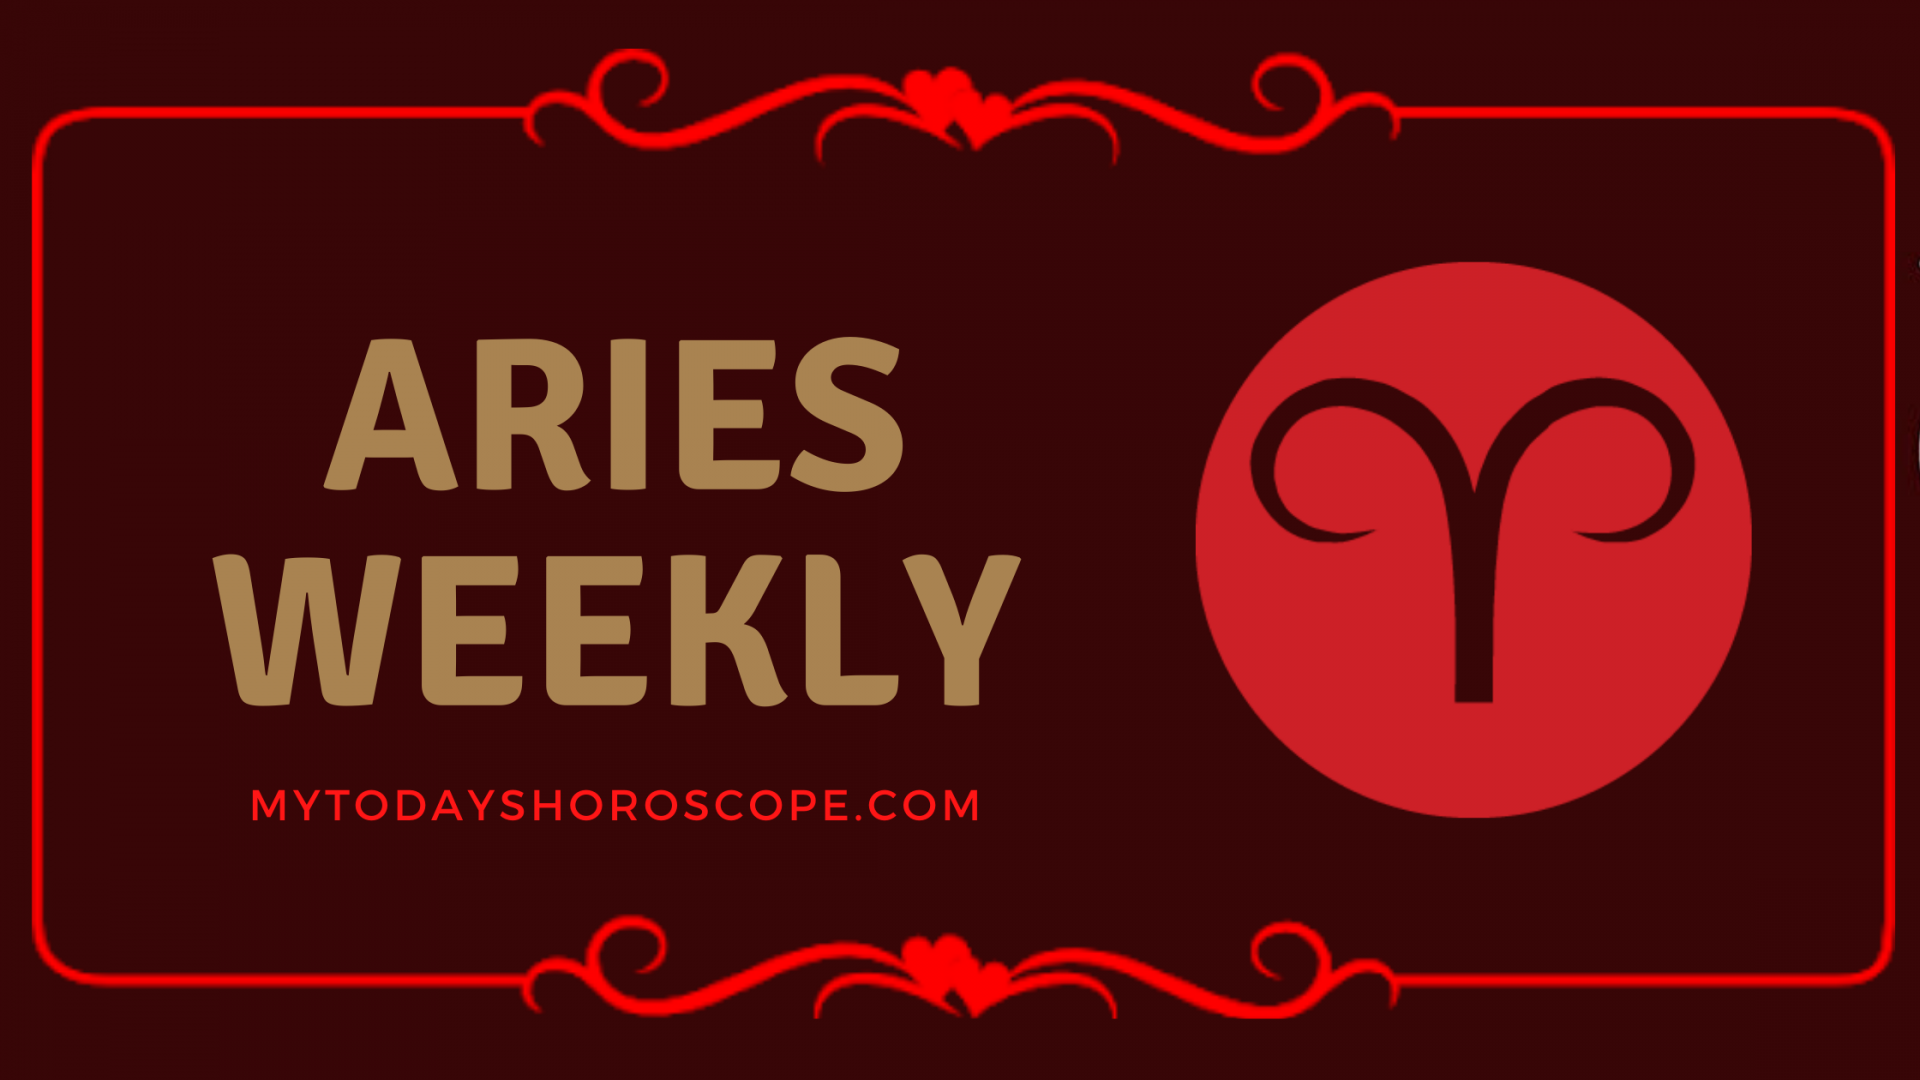 Dear Aries, this is a lucky time for your sign, especially from a professional standpoint.